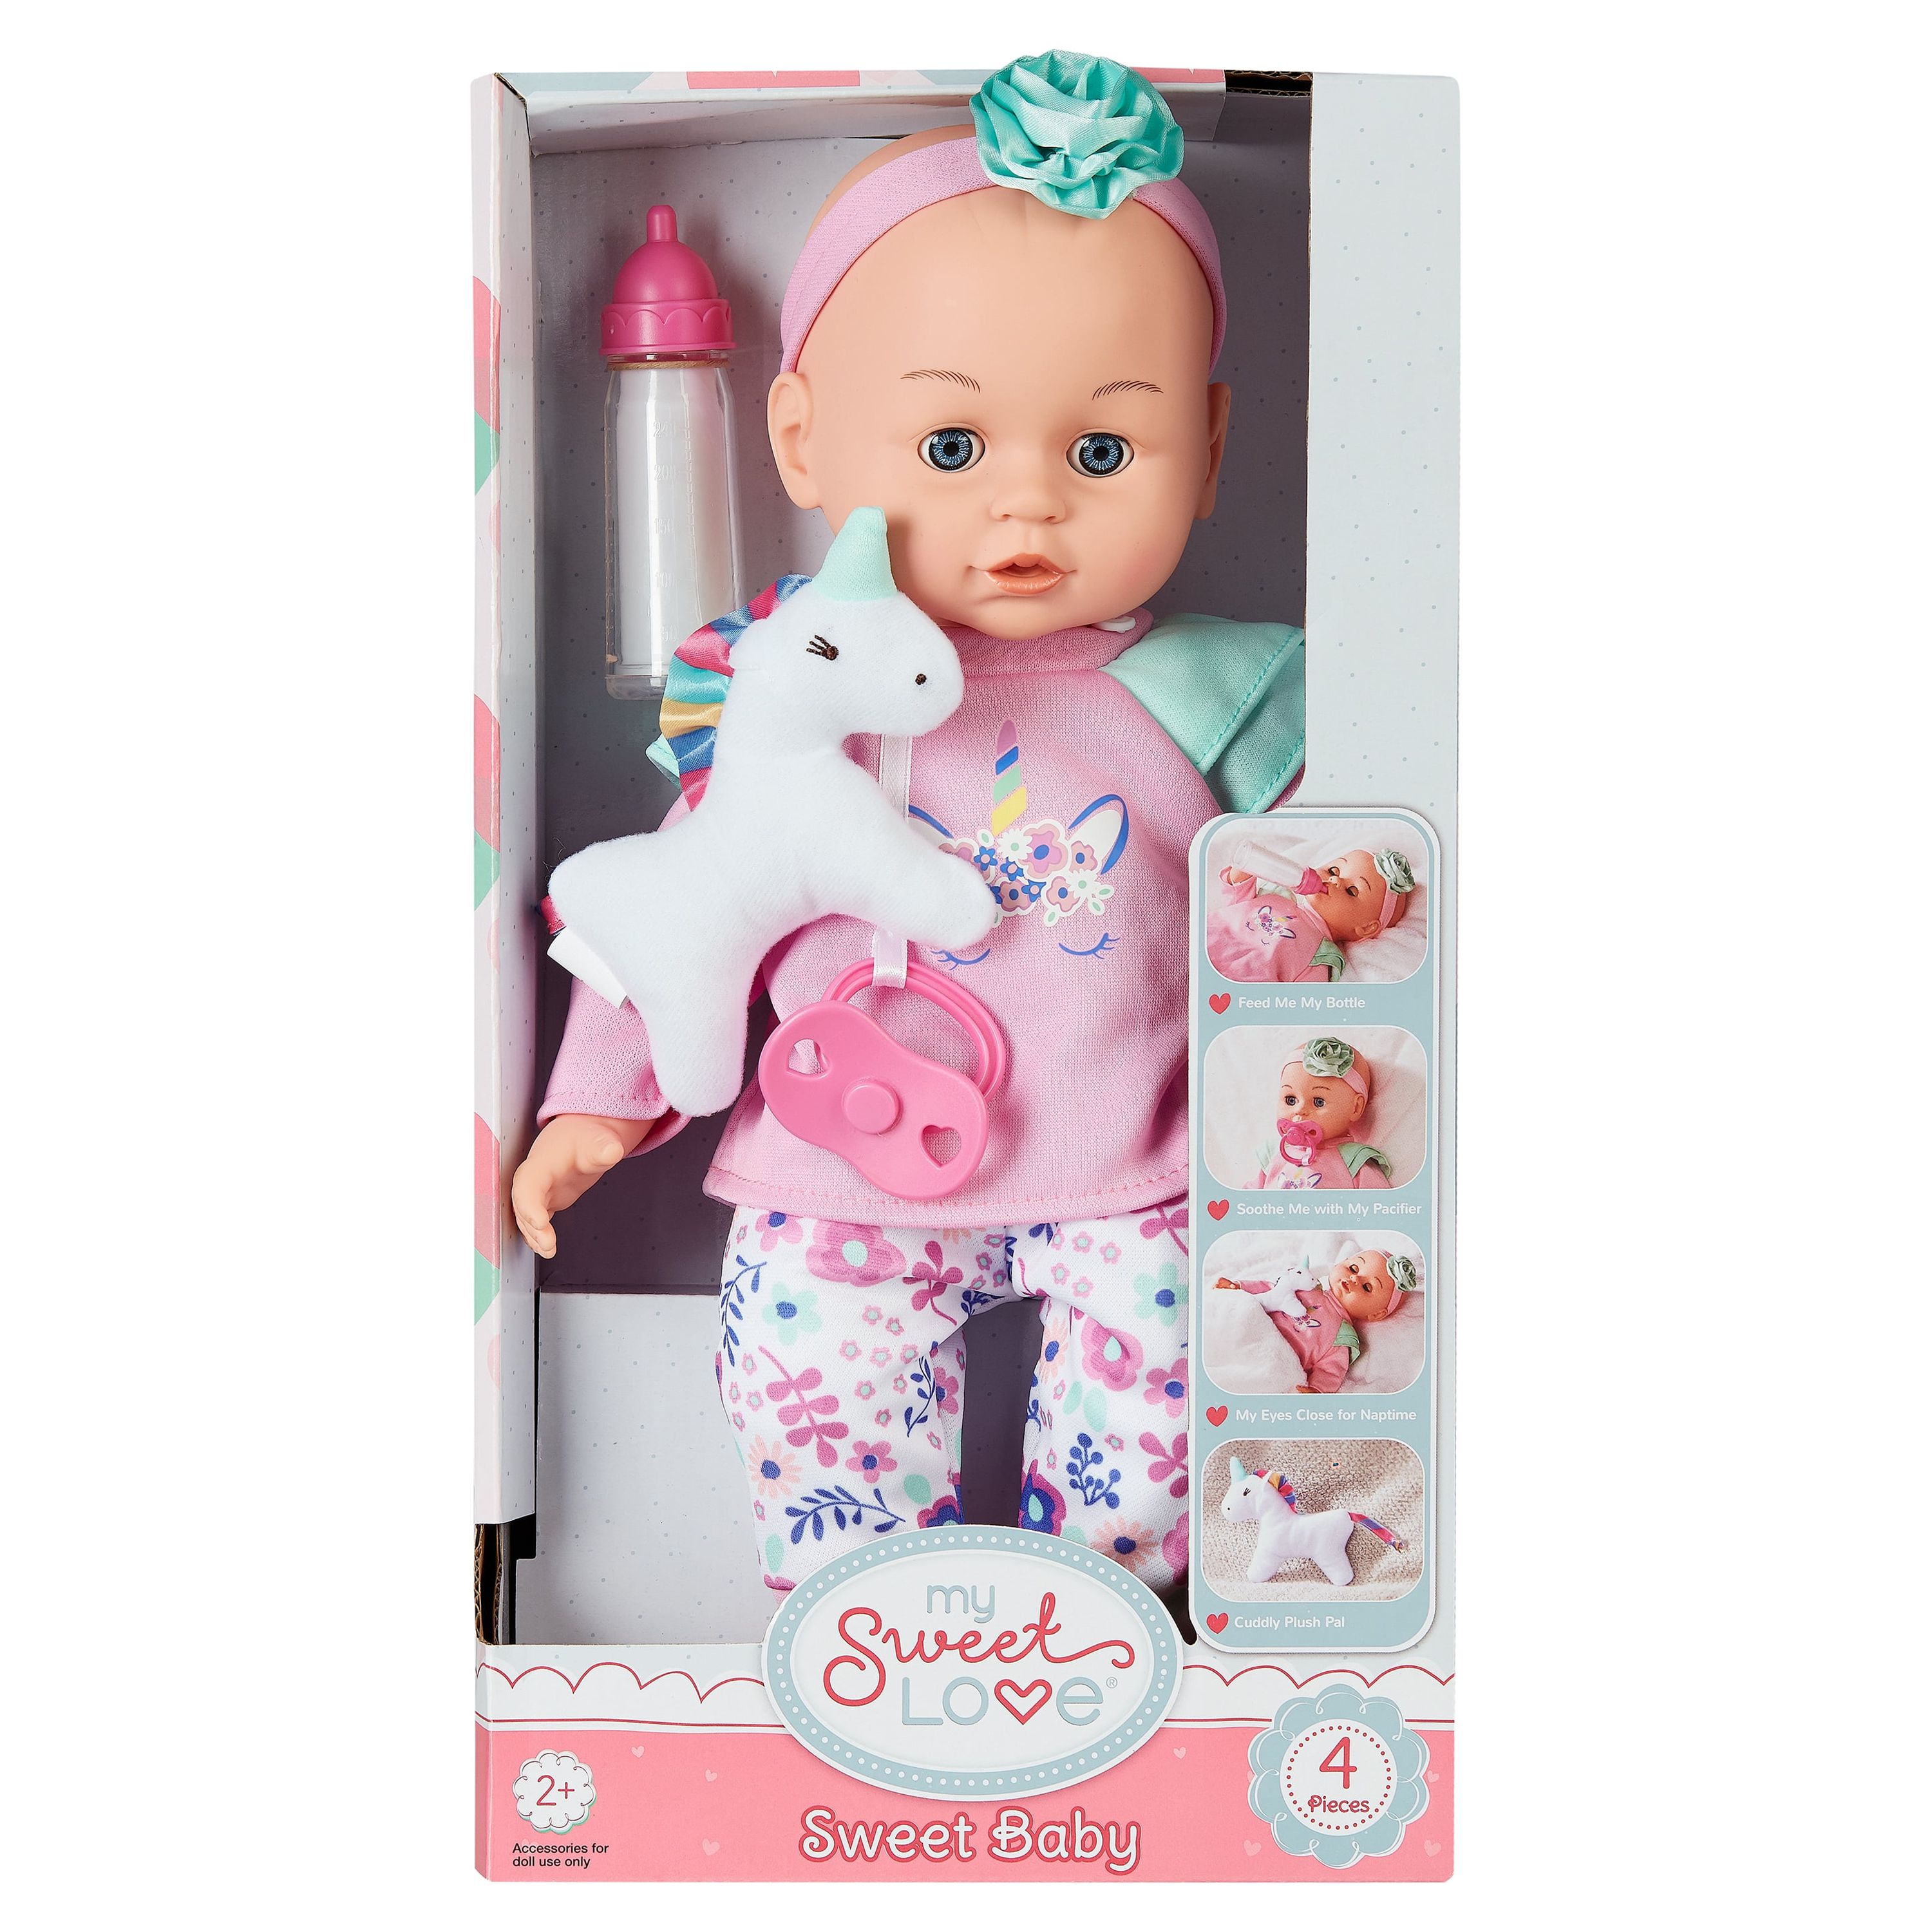 My Sweet Love Sweet Baby Doll Toy Set, 4 Pieces - image 3 of 5